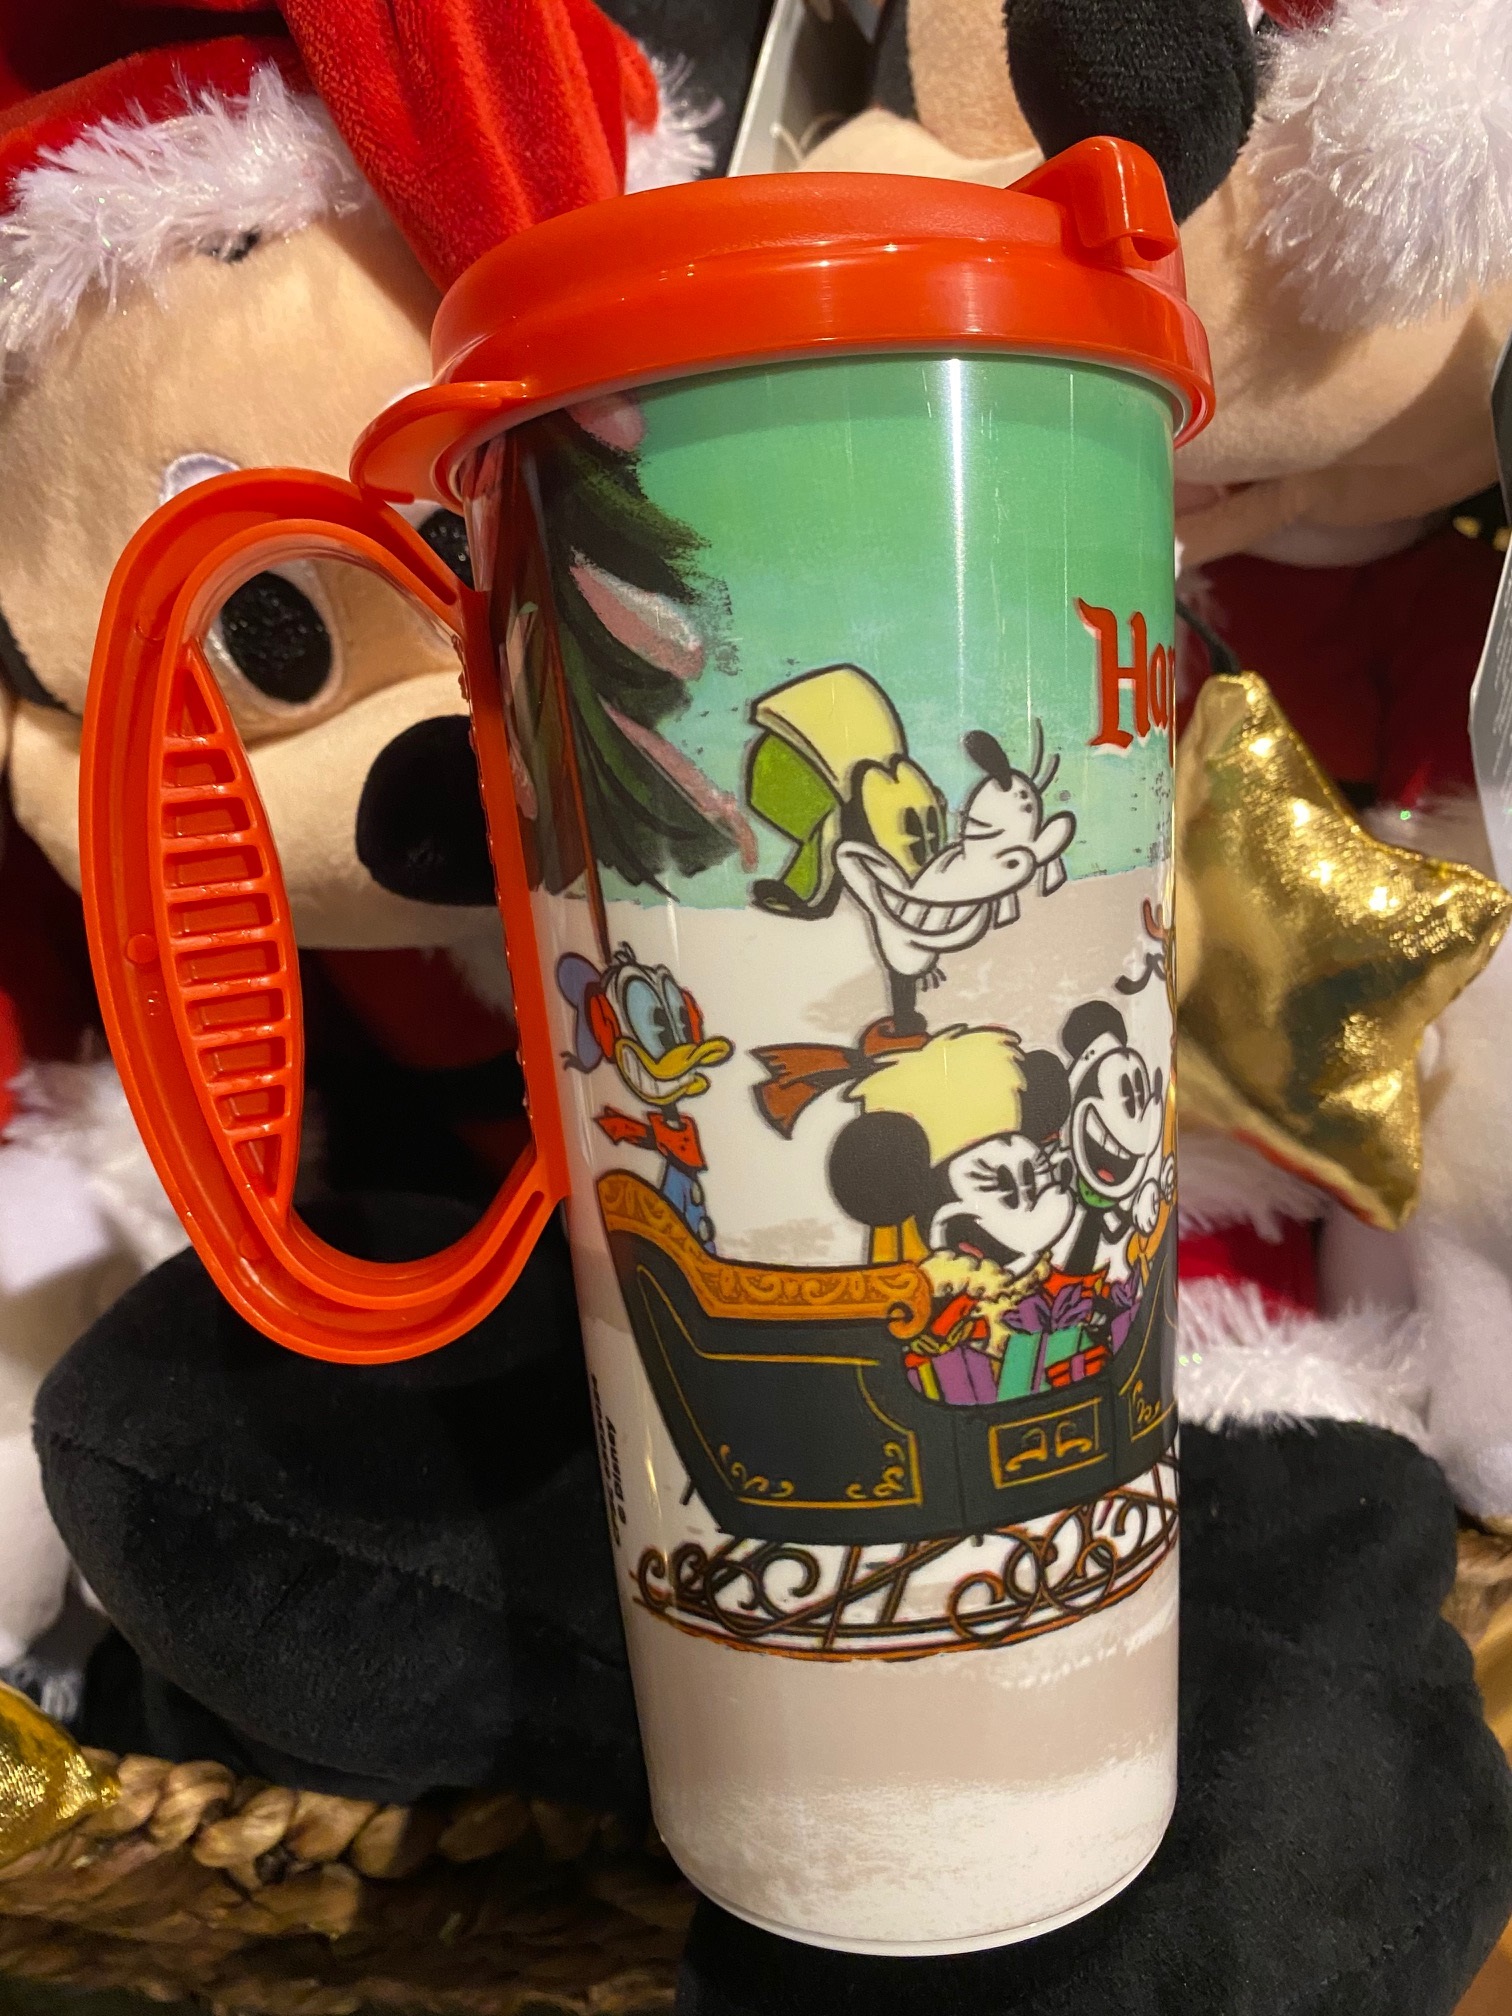 DisneyThemed Holiday Refillable Mugs Have Arrived at the